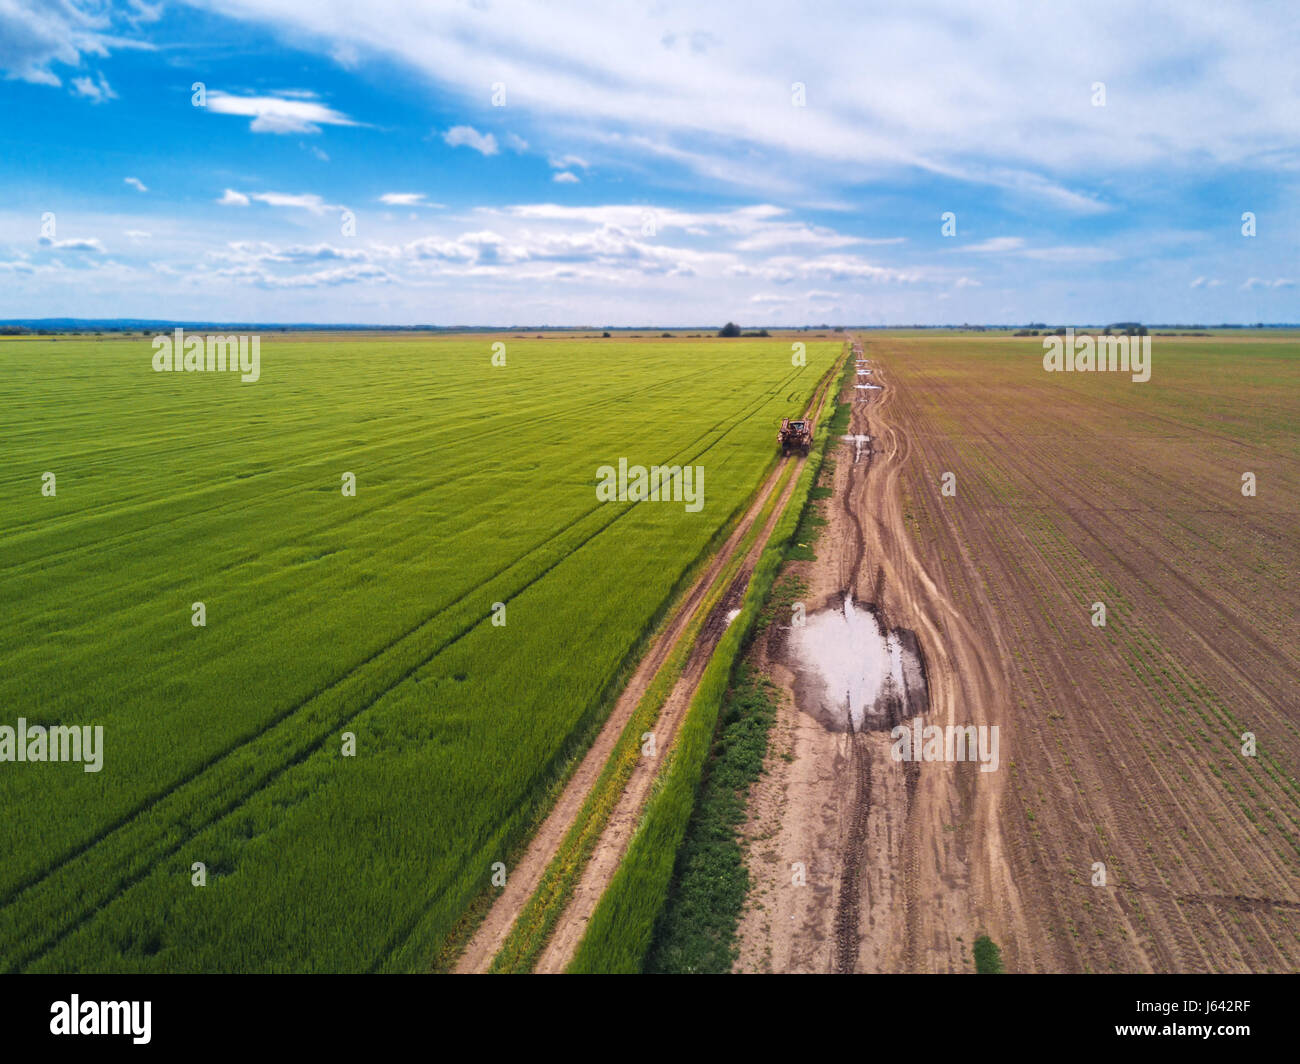 Tractor on country road through wheat field, aerial view from drone pov Stock Photo